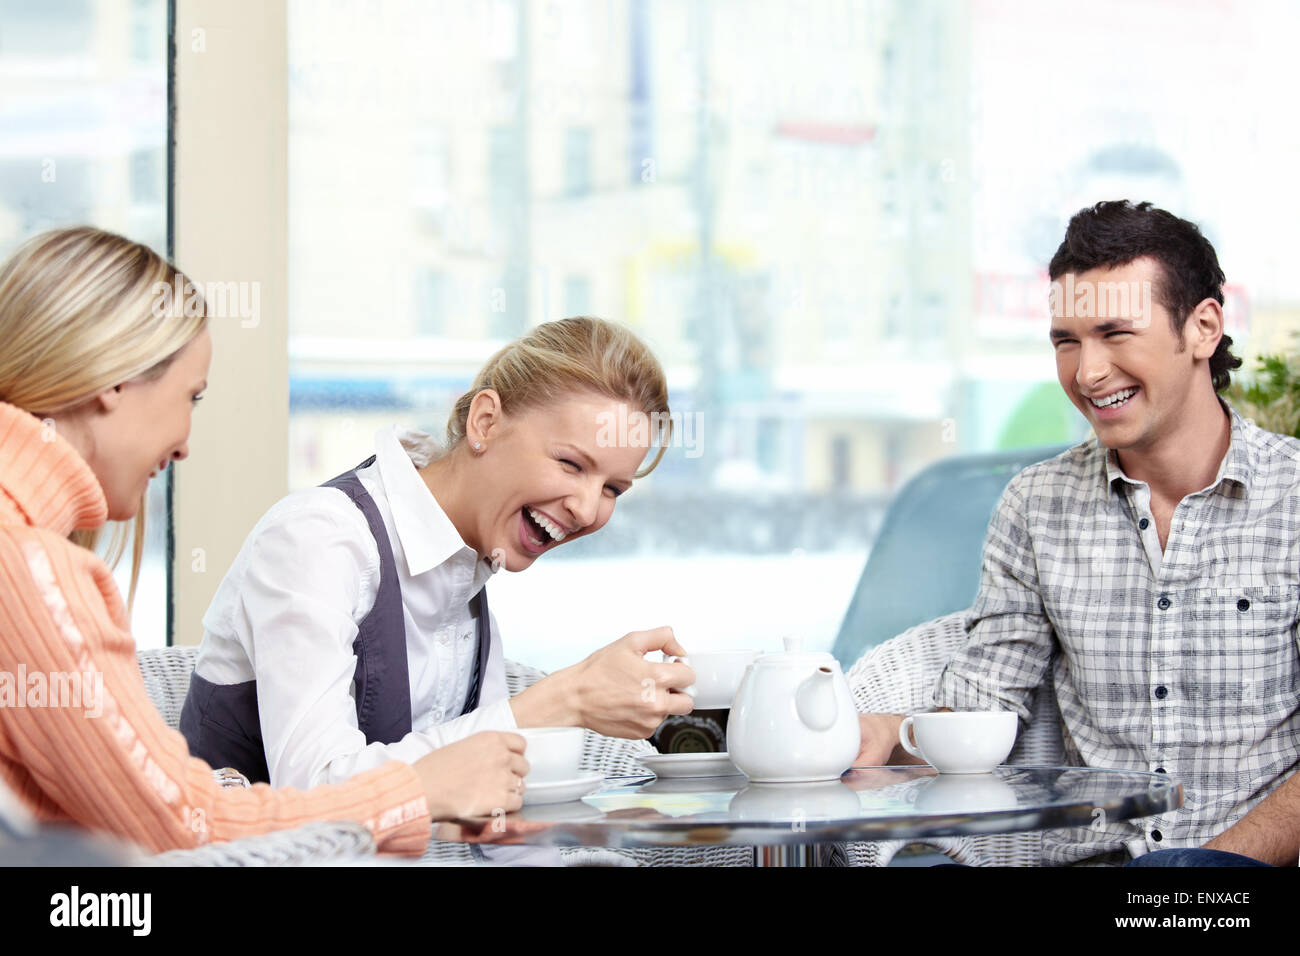 Young men behind a table in the foreground laugh Stock Photo